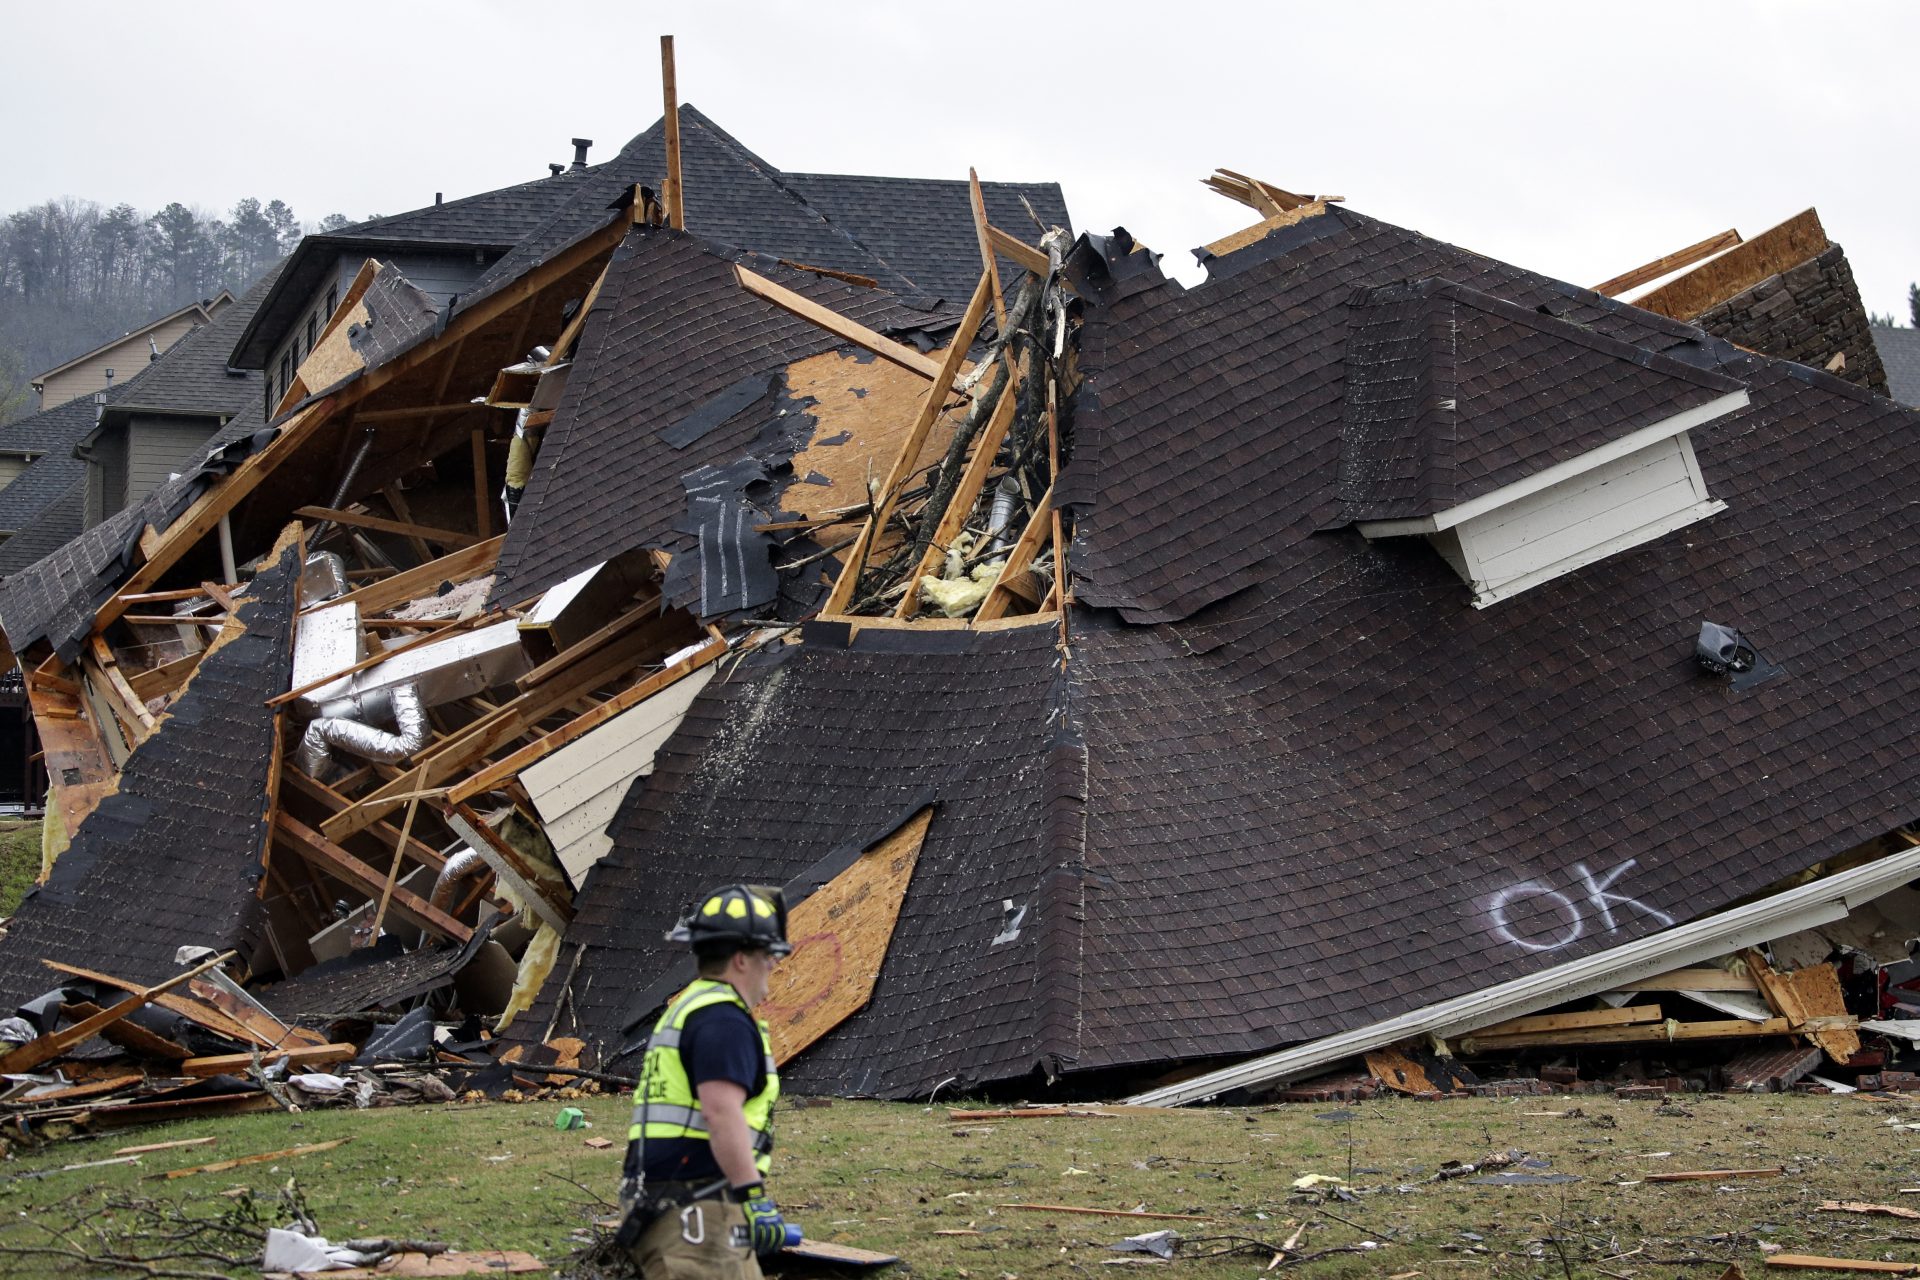 A firefighter surveys damage to a house after a tornado touches down south of Birmingham in the Eagle Point community damaging multiple homes Thursday March 25, 2021.